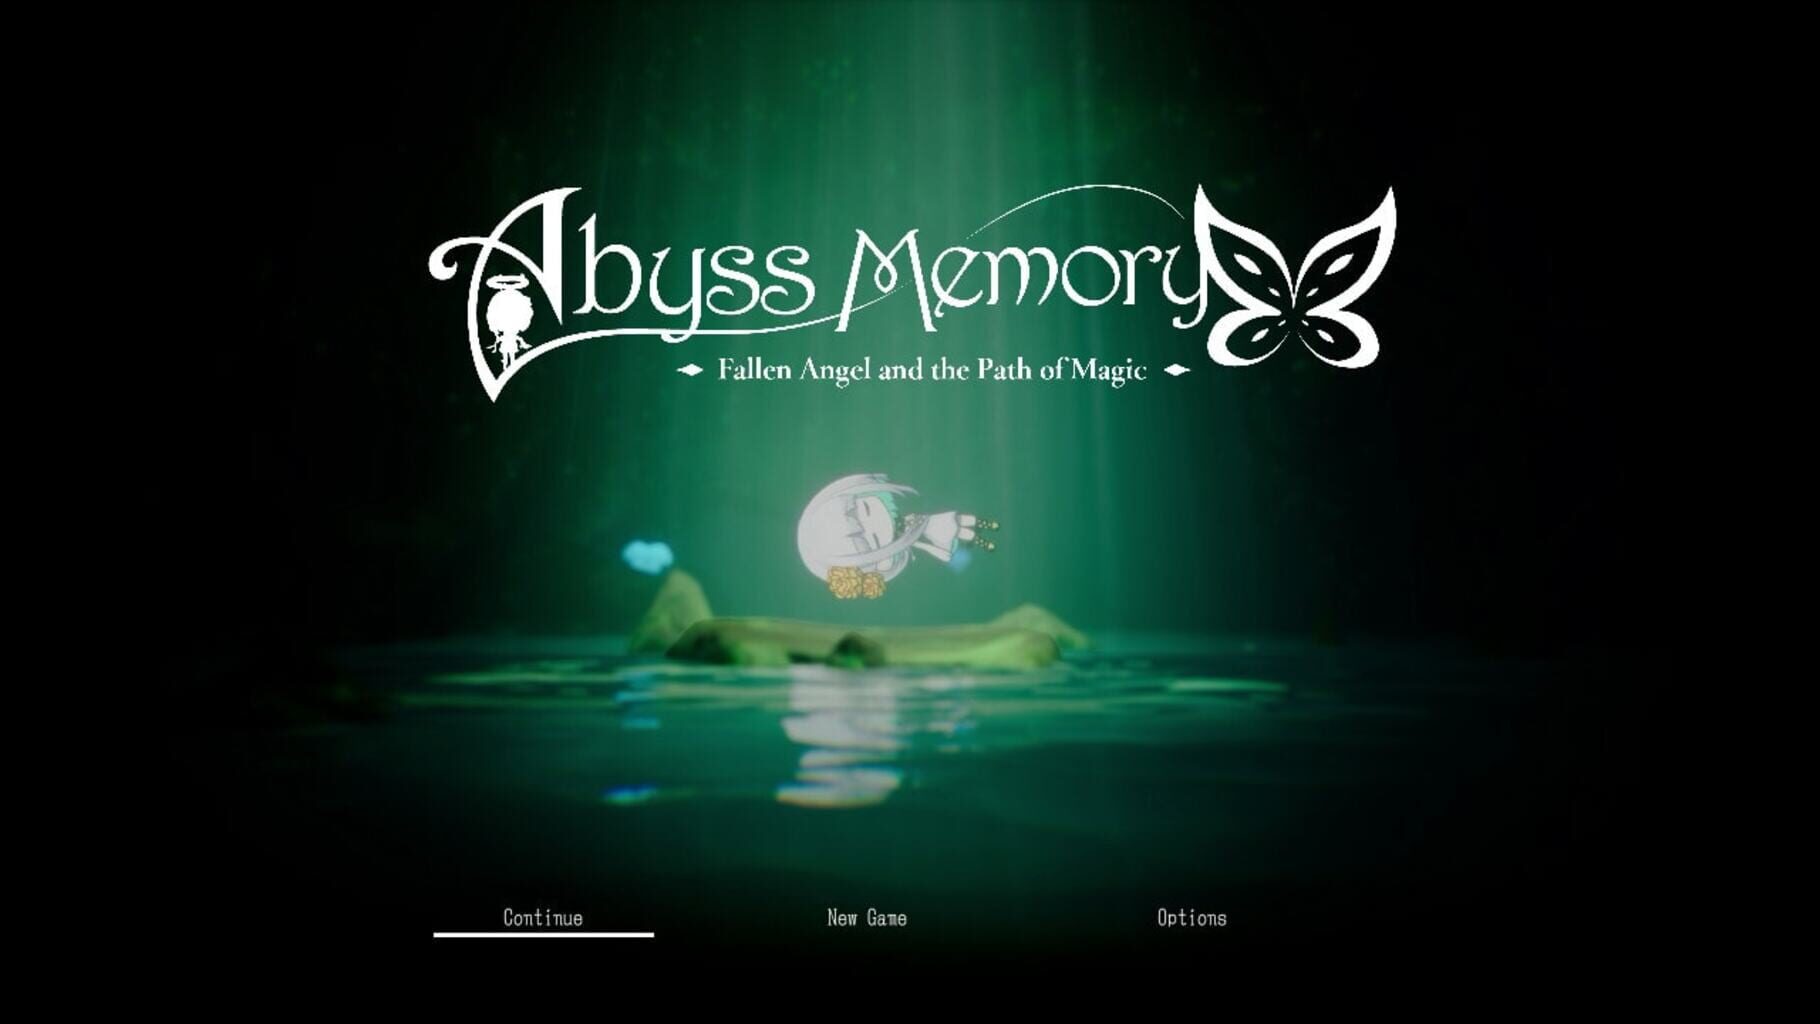 Abyss Memory Fallen Angel and the Path of Magic screenshot